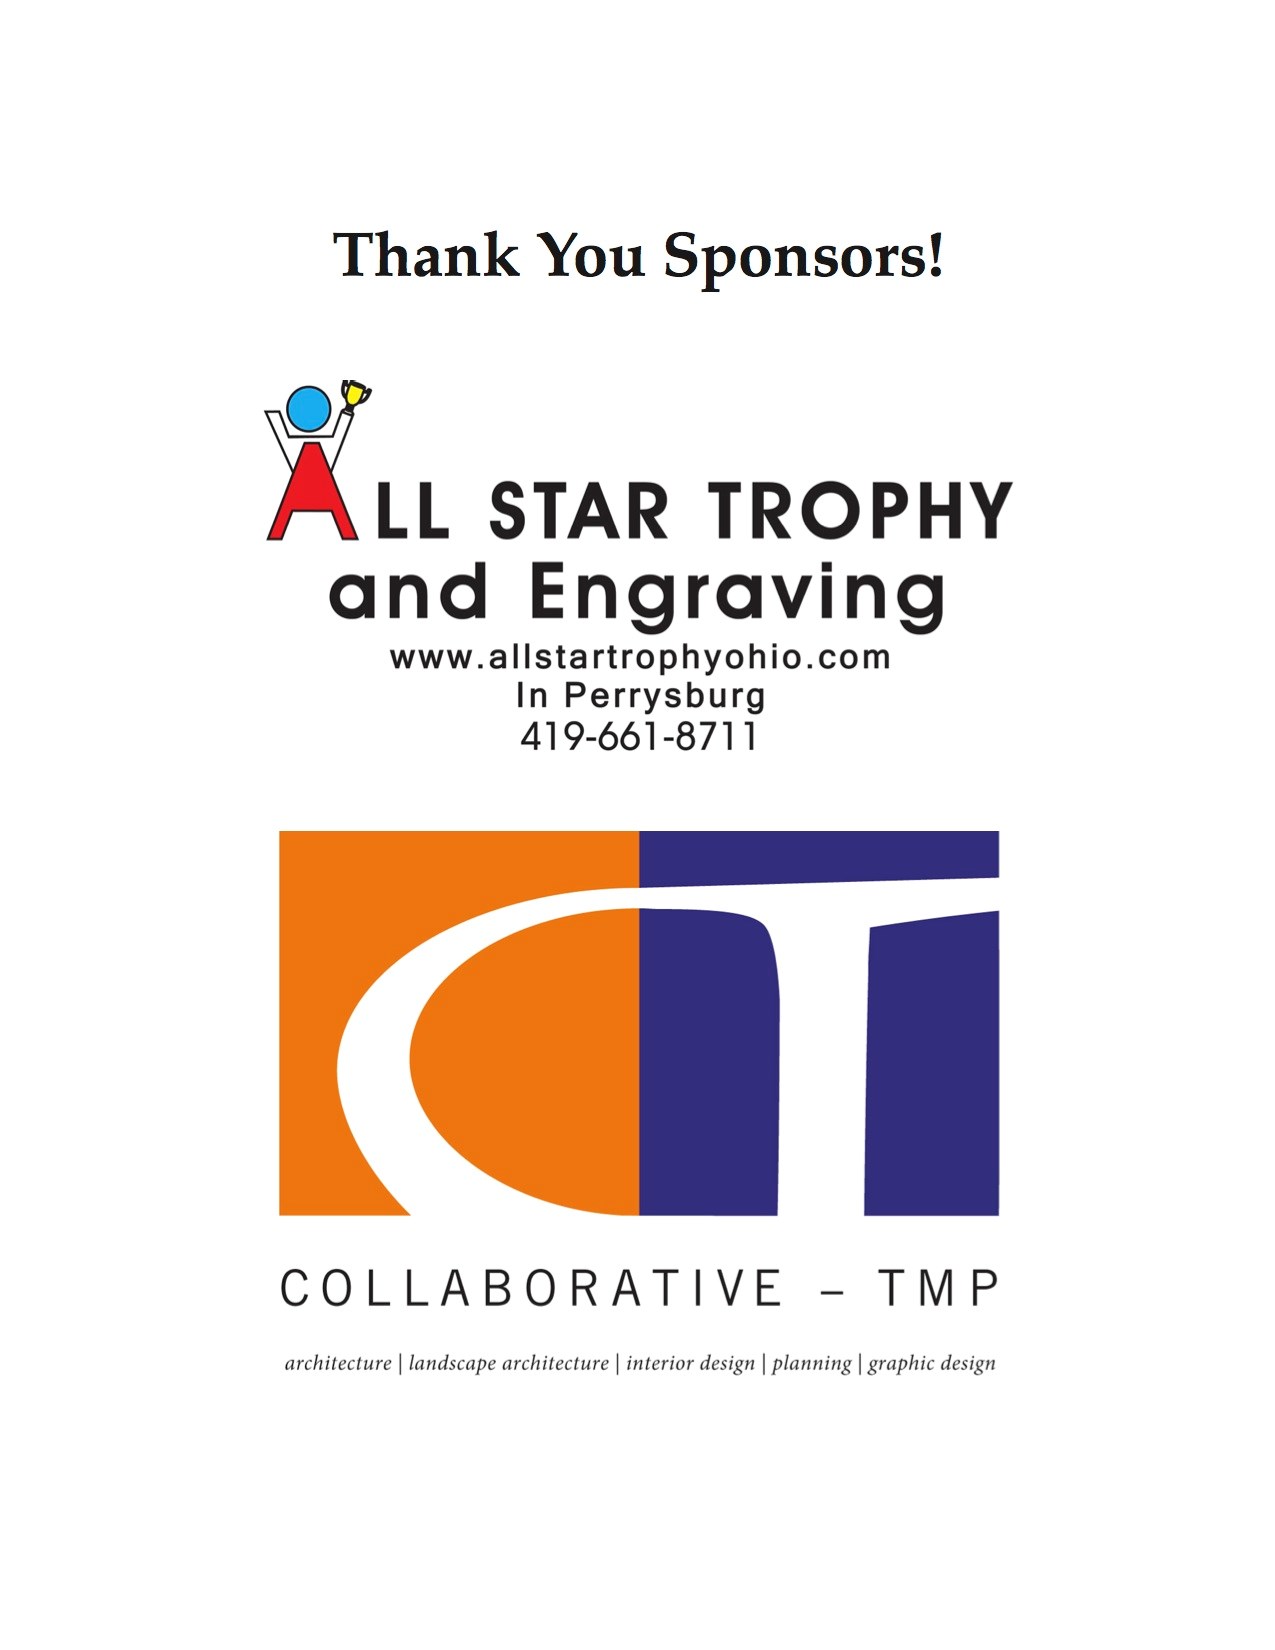 Thank you sponsors--logos for All Star Trophy and Engraving and Collaborative TMP